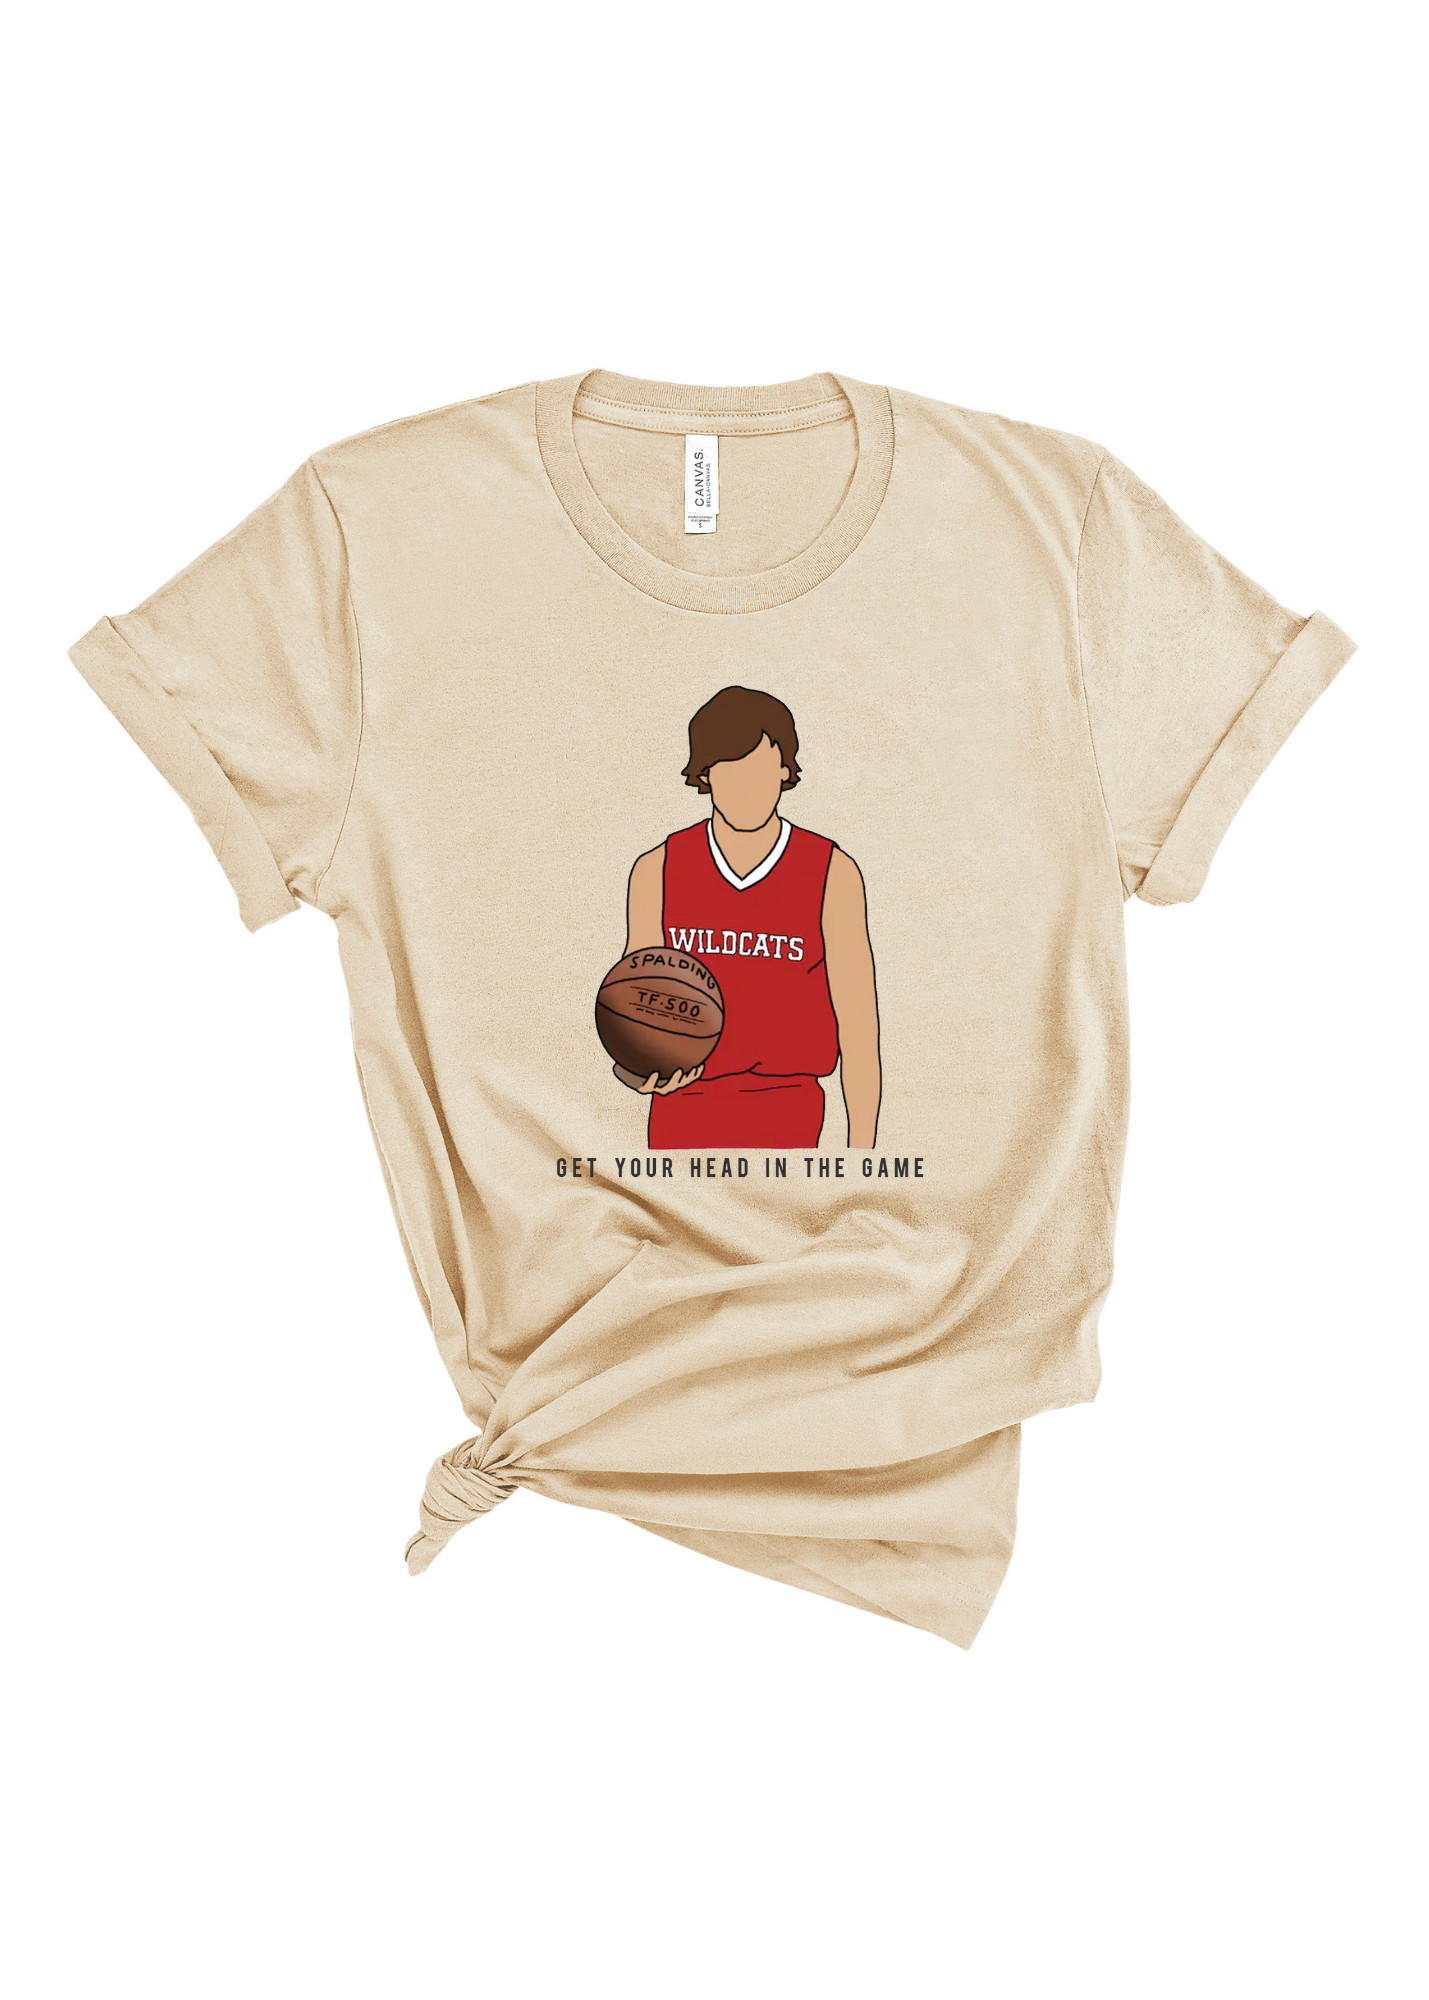 Get Your Head in the Game | Tee | Adult-Sister Shirts-Sister Shirts, Cute & Custom Tees for Mama & Littles in Trussville, Alabama.